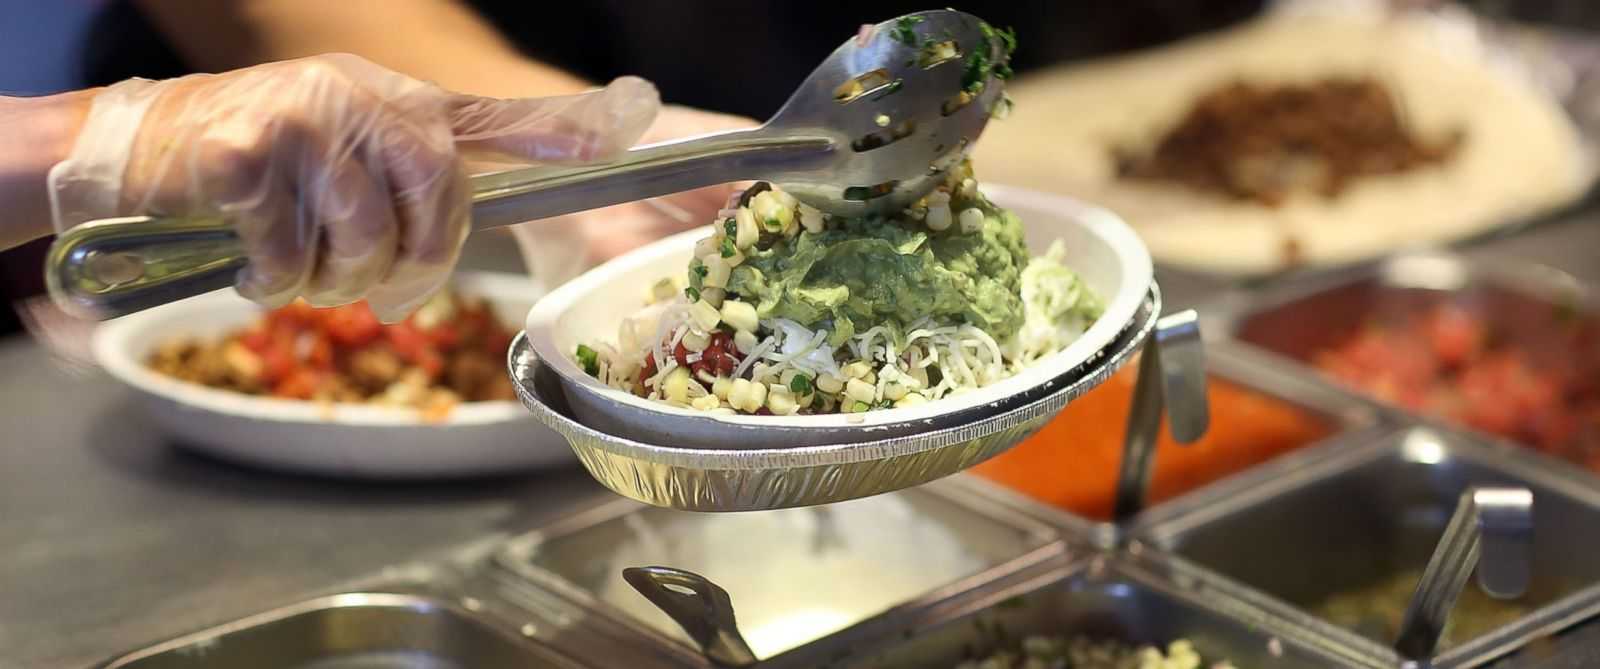 chipotle hours, chipotle hours of operation